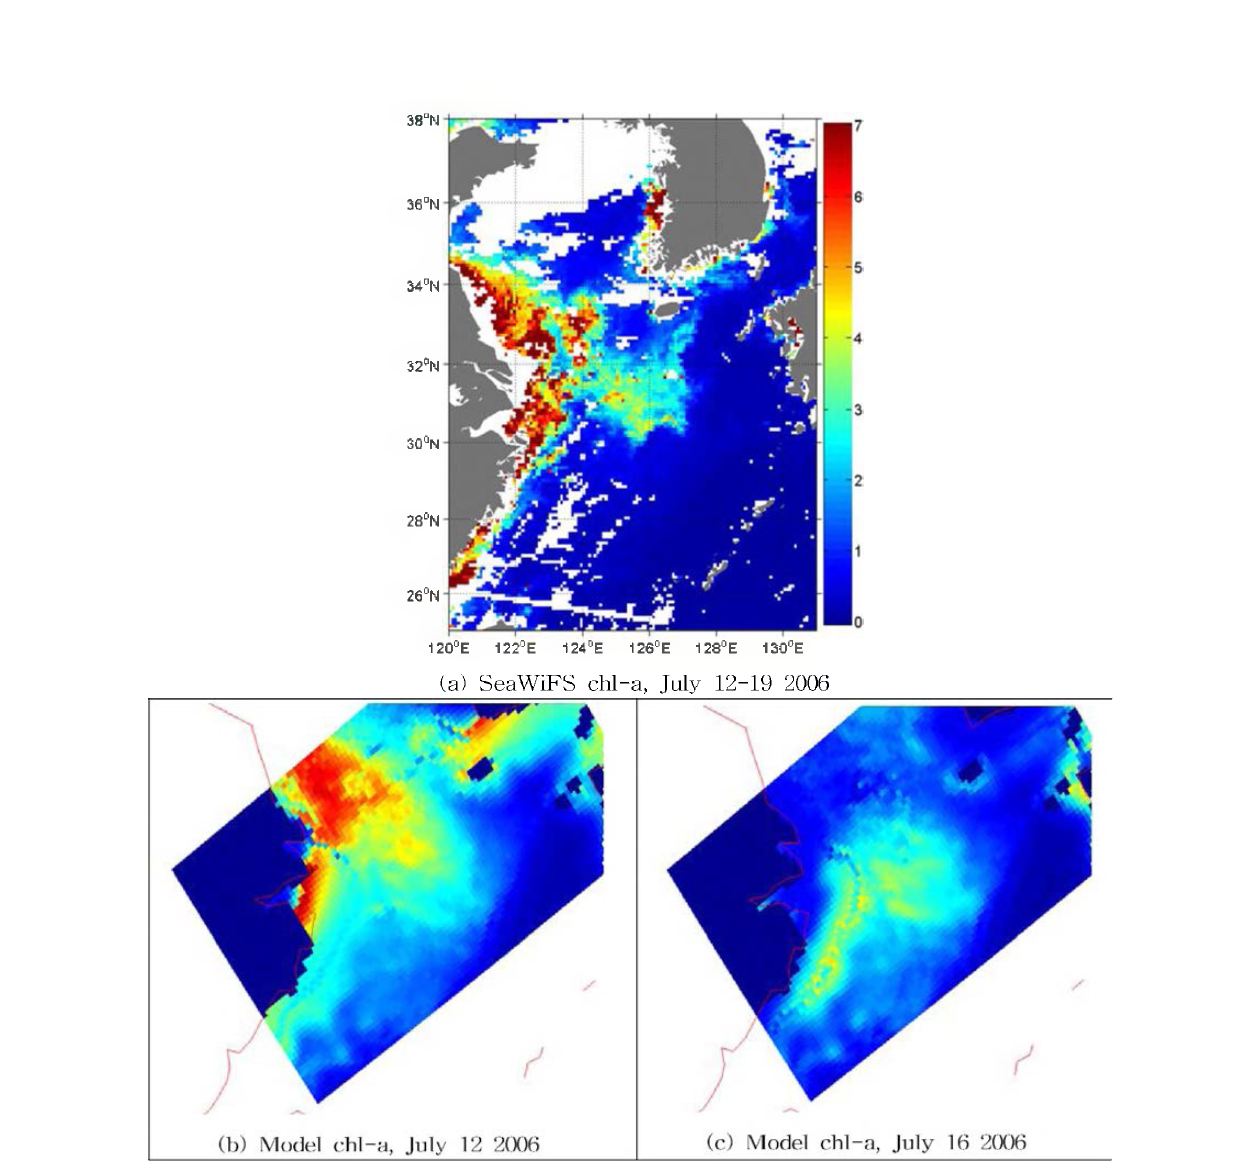 SeaWiFS chlorophyll-a composite image from July 12 to 19 2006(a),distribution of chlorophyll-a concentration 011 July 12 from model results(b), and distribution of chlorophyll-a concentration 011 July 16 by model(c).